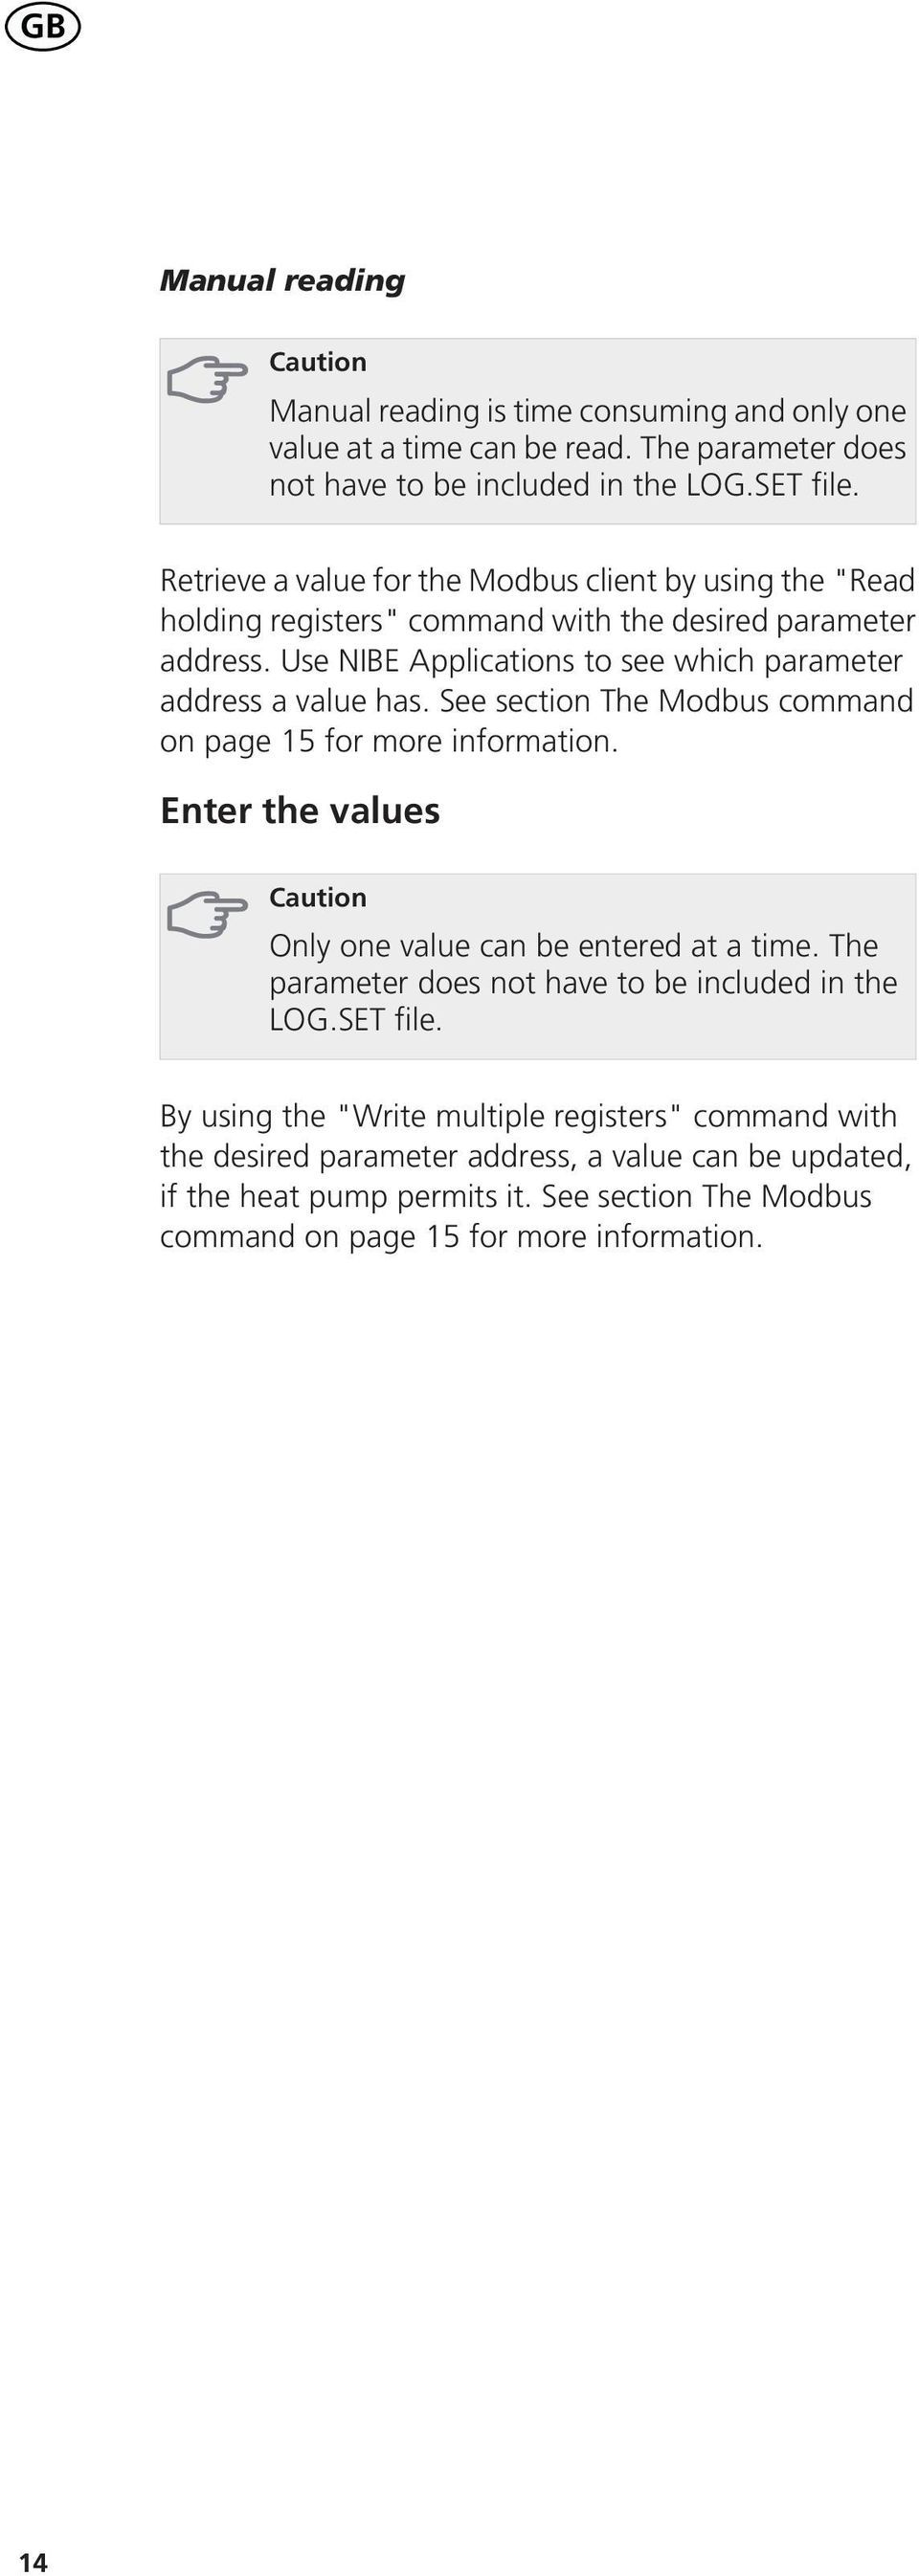 See section The Modbus command on page 15 for more information. Enter the values Caution Only one value can be entered at a time. The parameter does not have to be included in the LOG.